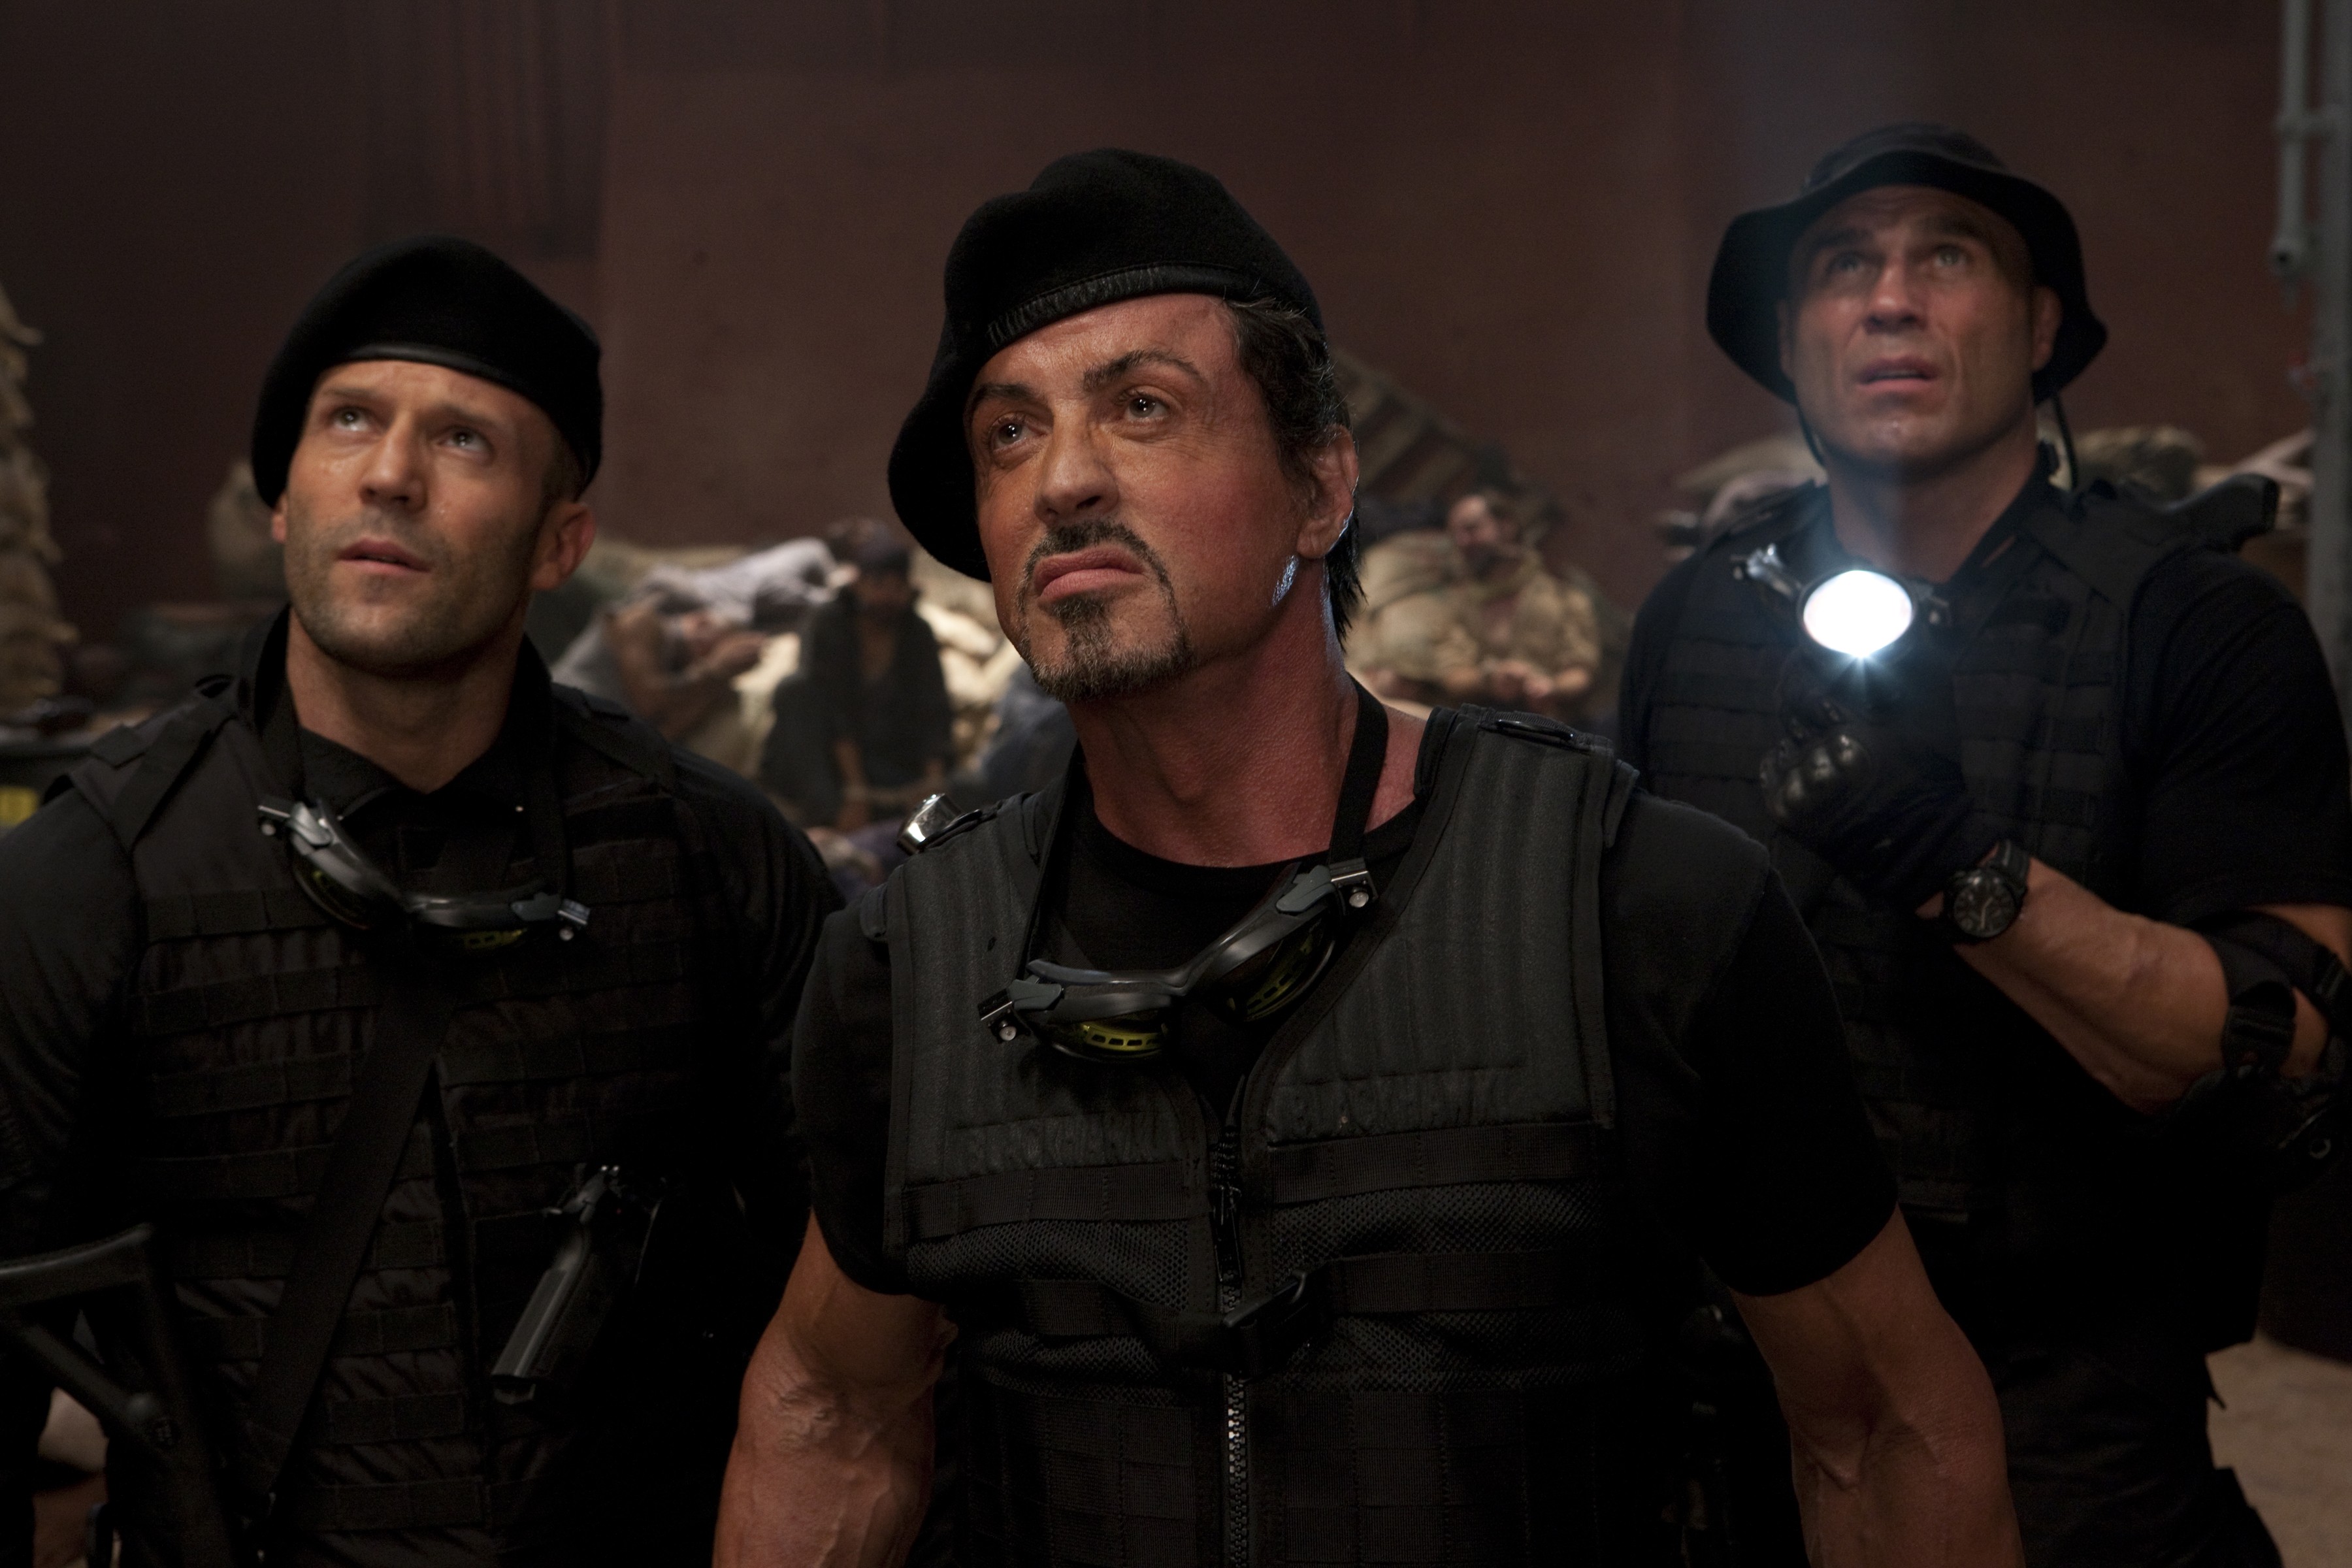 Randy Couture, Dolph Lundgren, The Expendables, UFC, Sylvester Stallone